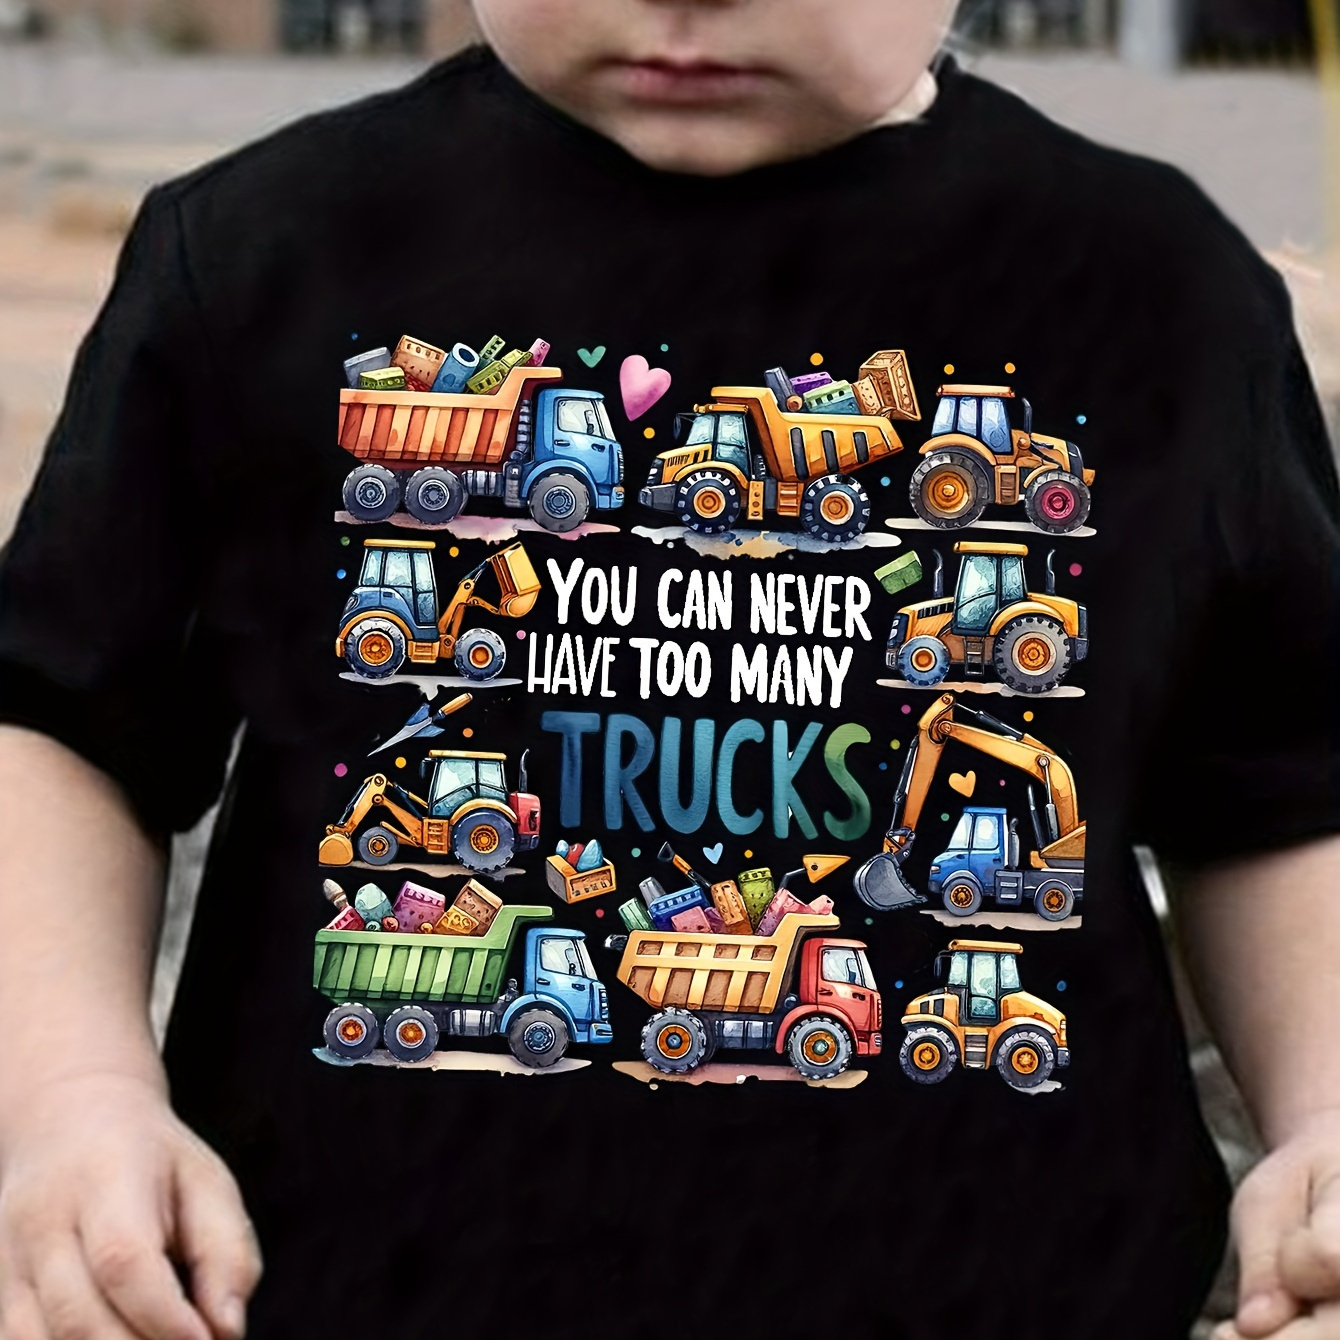 

You Can Never Have Too Many Trucks Print, Boy's Round Neck Casual Short Sleeve T-shirt, Comfortable Soft Versatile Top